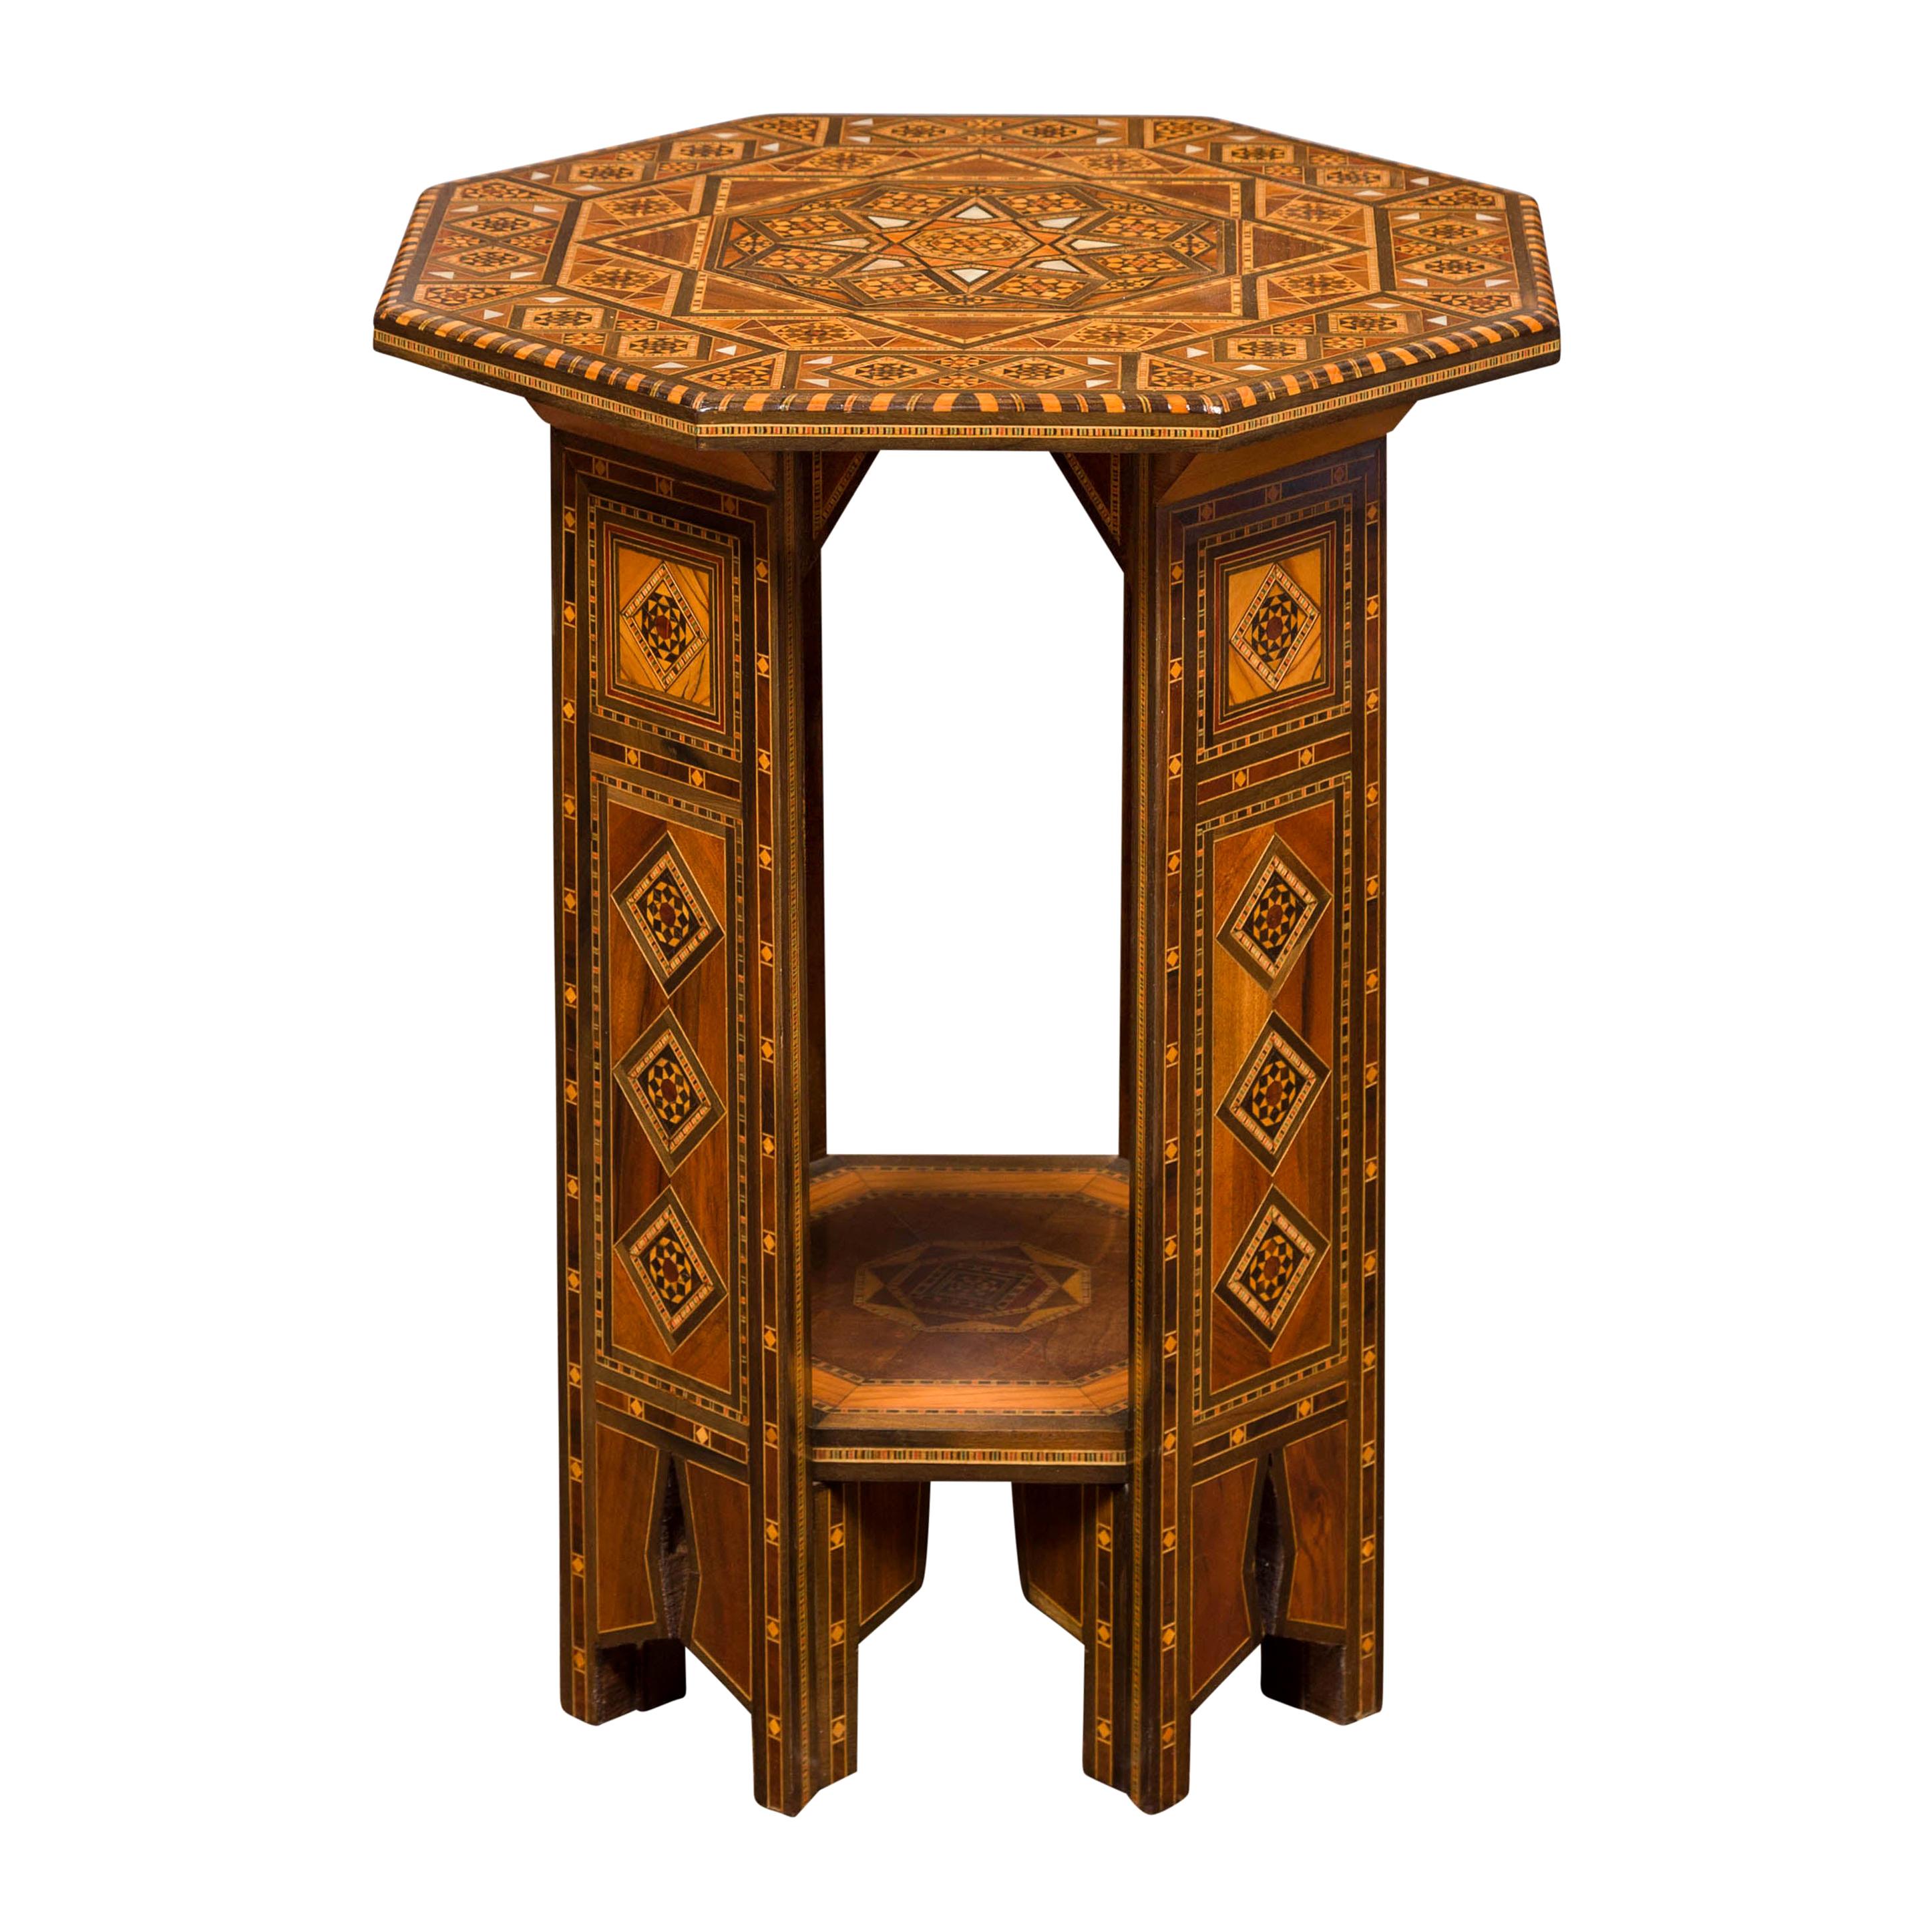 Syrian Moorish Style 1920s Painted Octagonal Table with Pierced Sides and Shelf